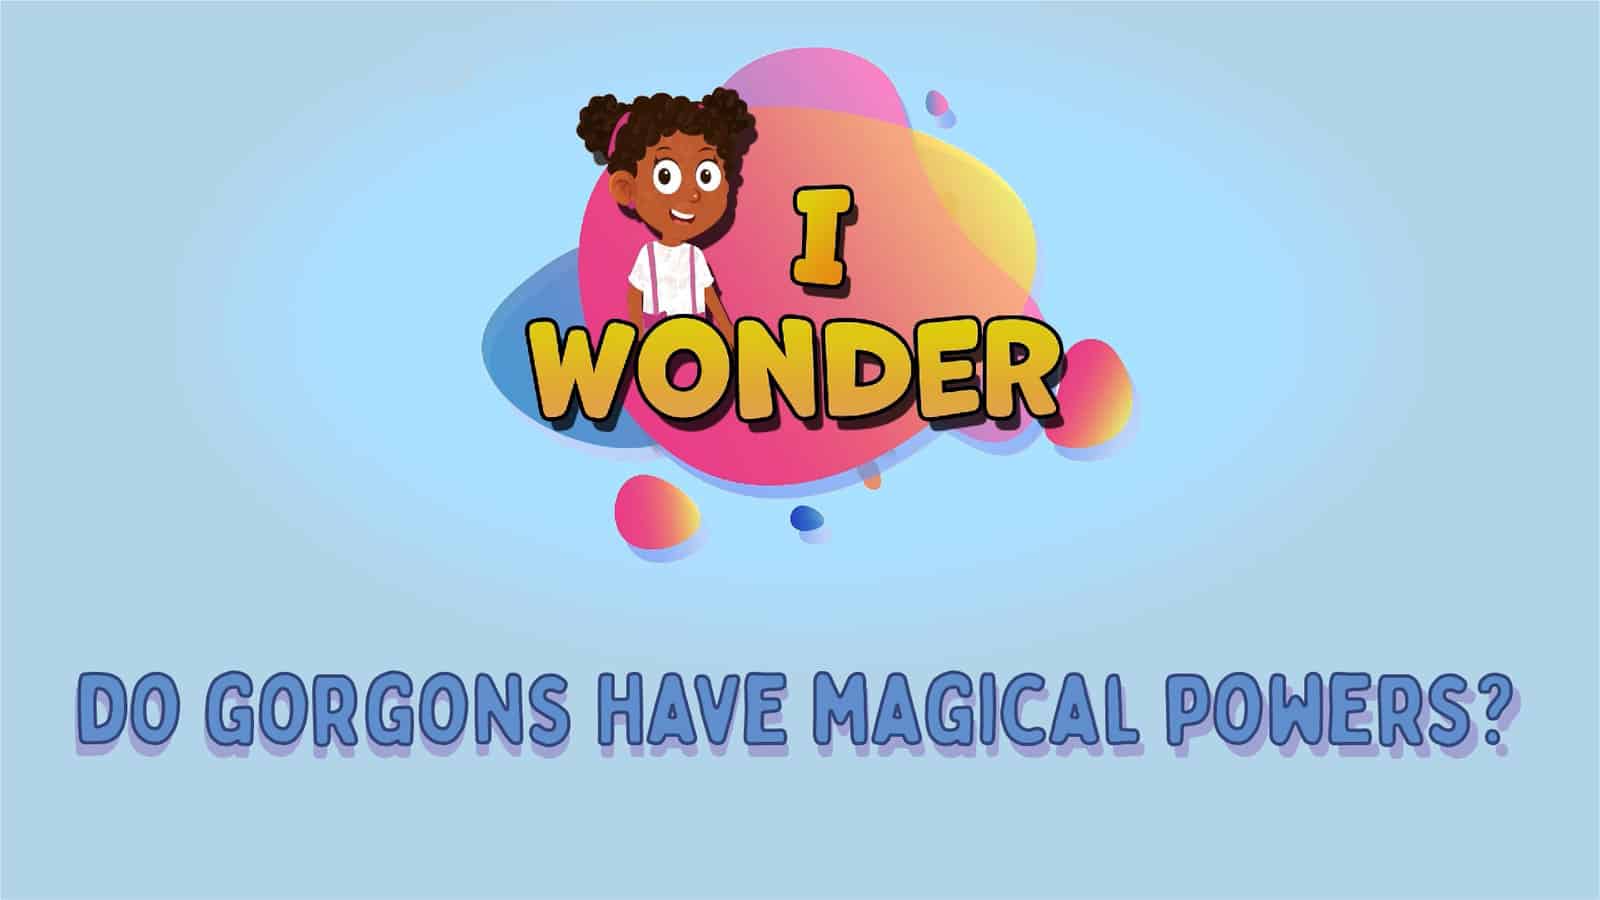 Do Gorgons Have Magical Powers?